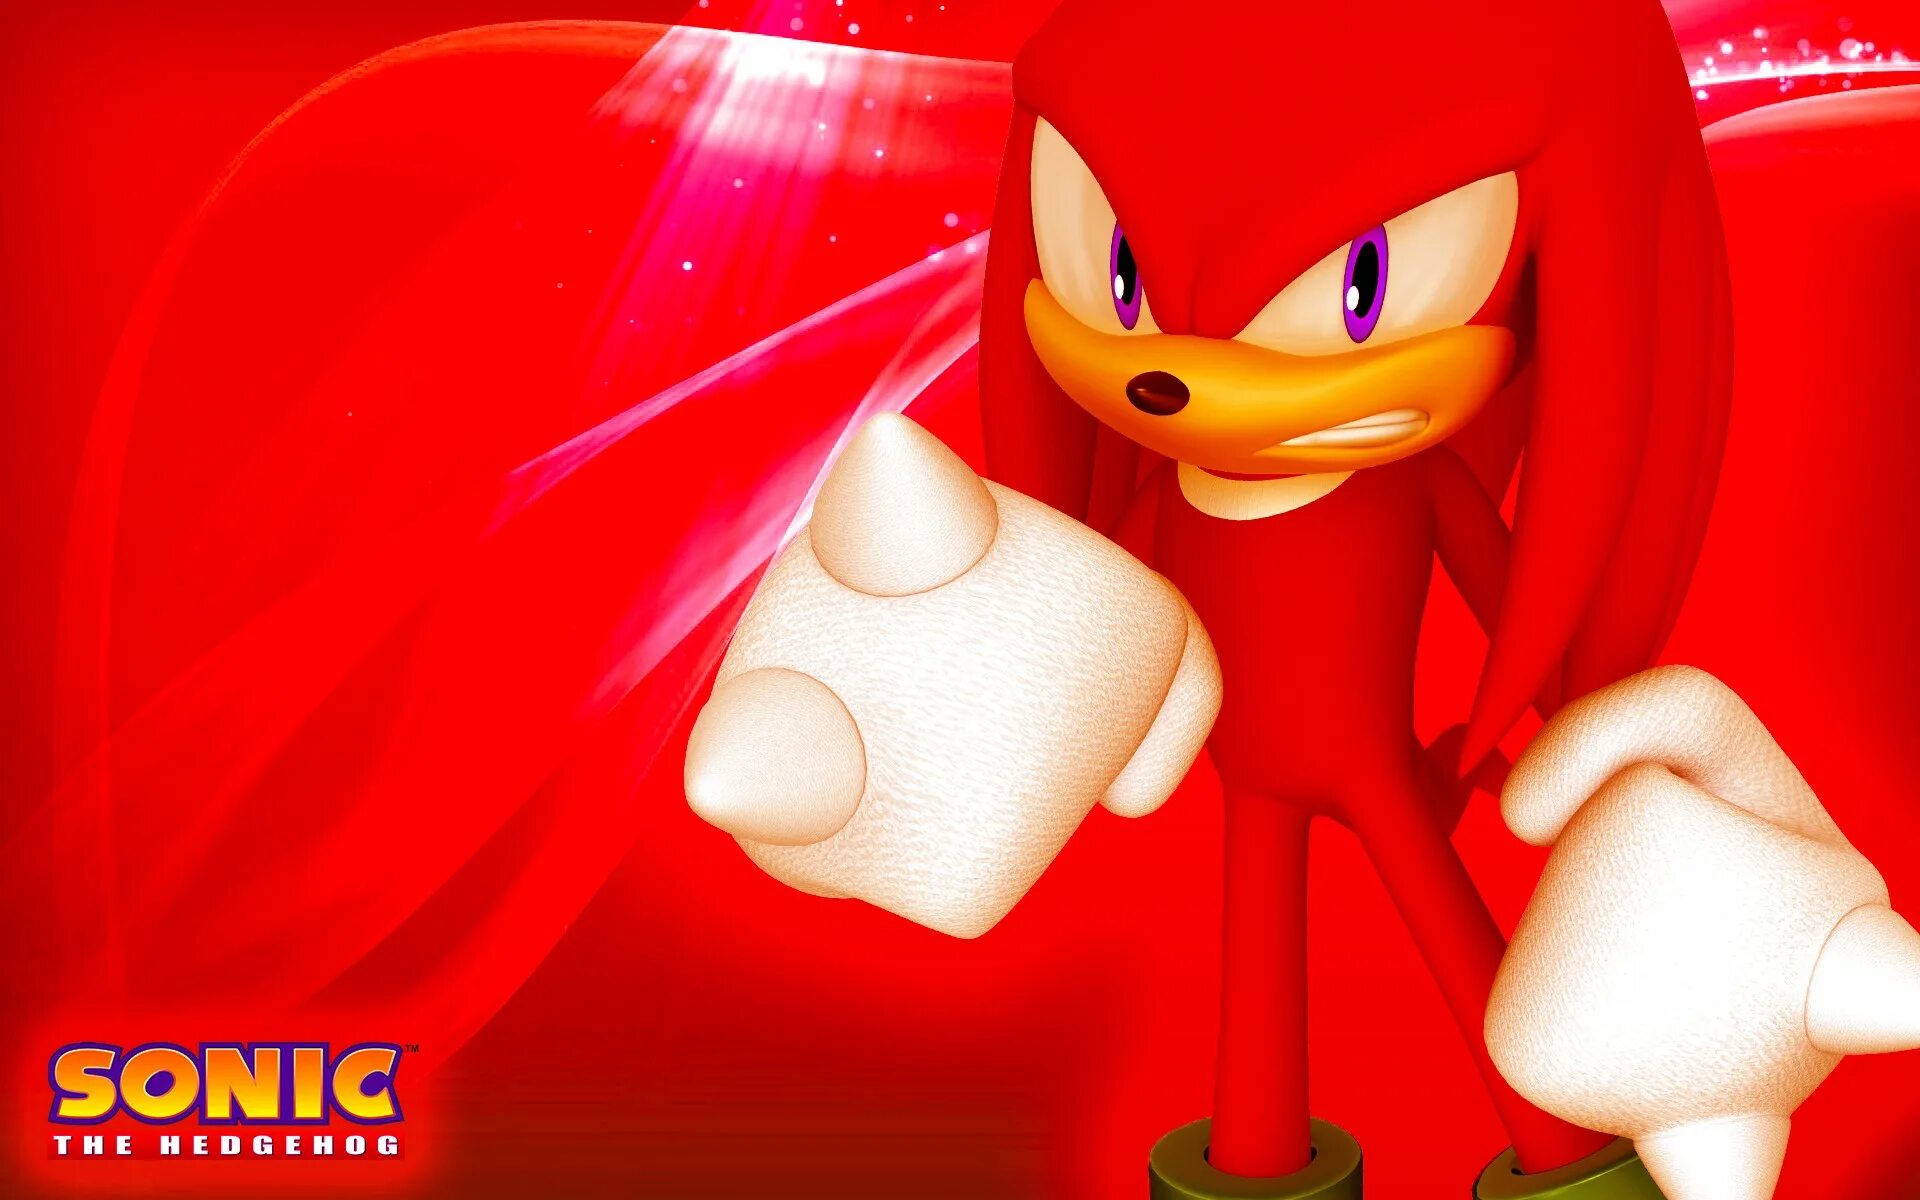 Sonic and knuckles download. Ехидна НАКЛЗ. Соник и НАКЛЗ. Ехидна НАКЛЗ Соник. Sonic НАКЛЗ.